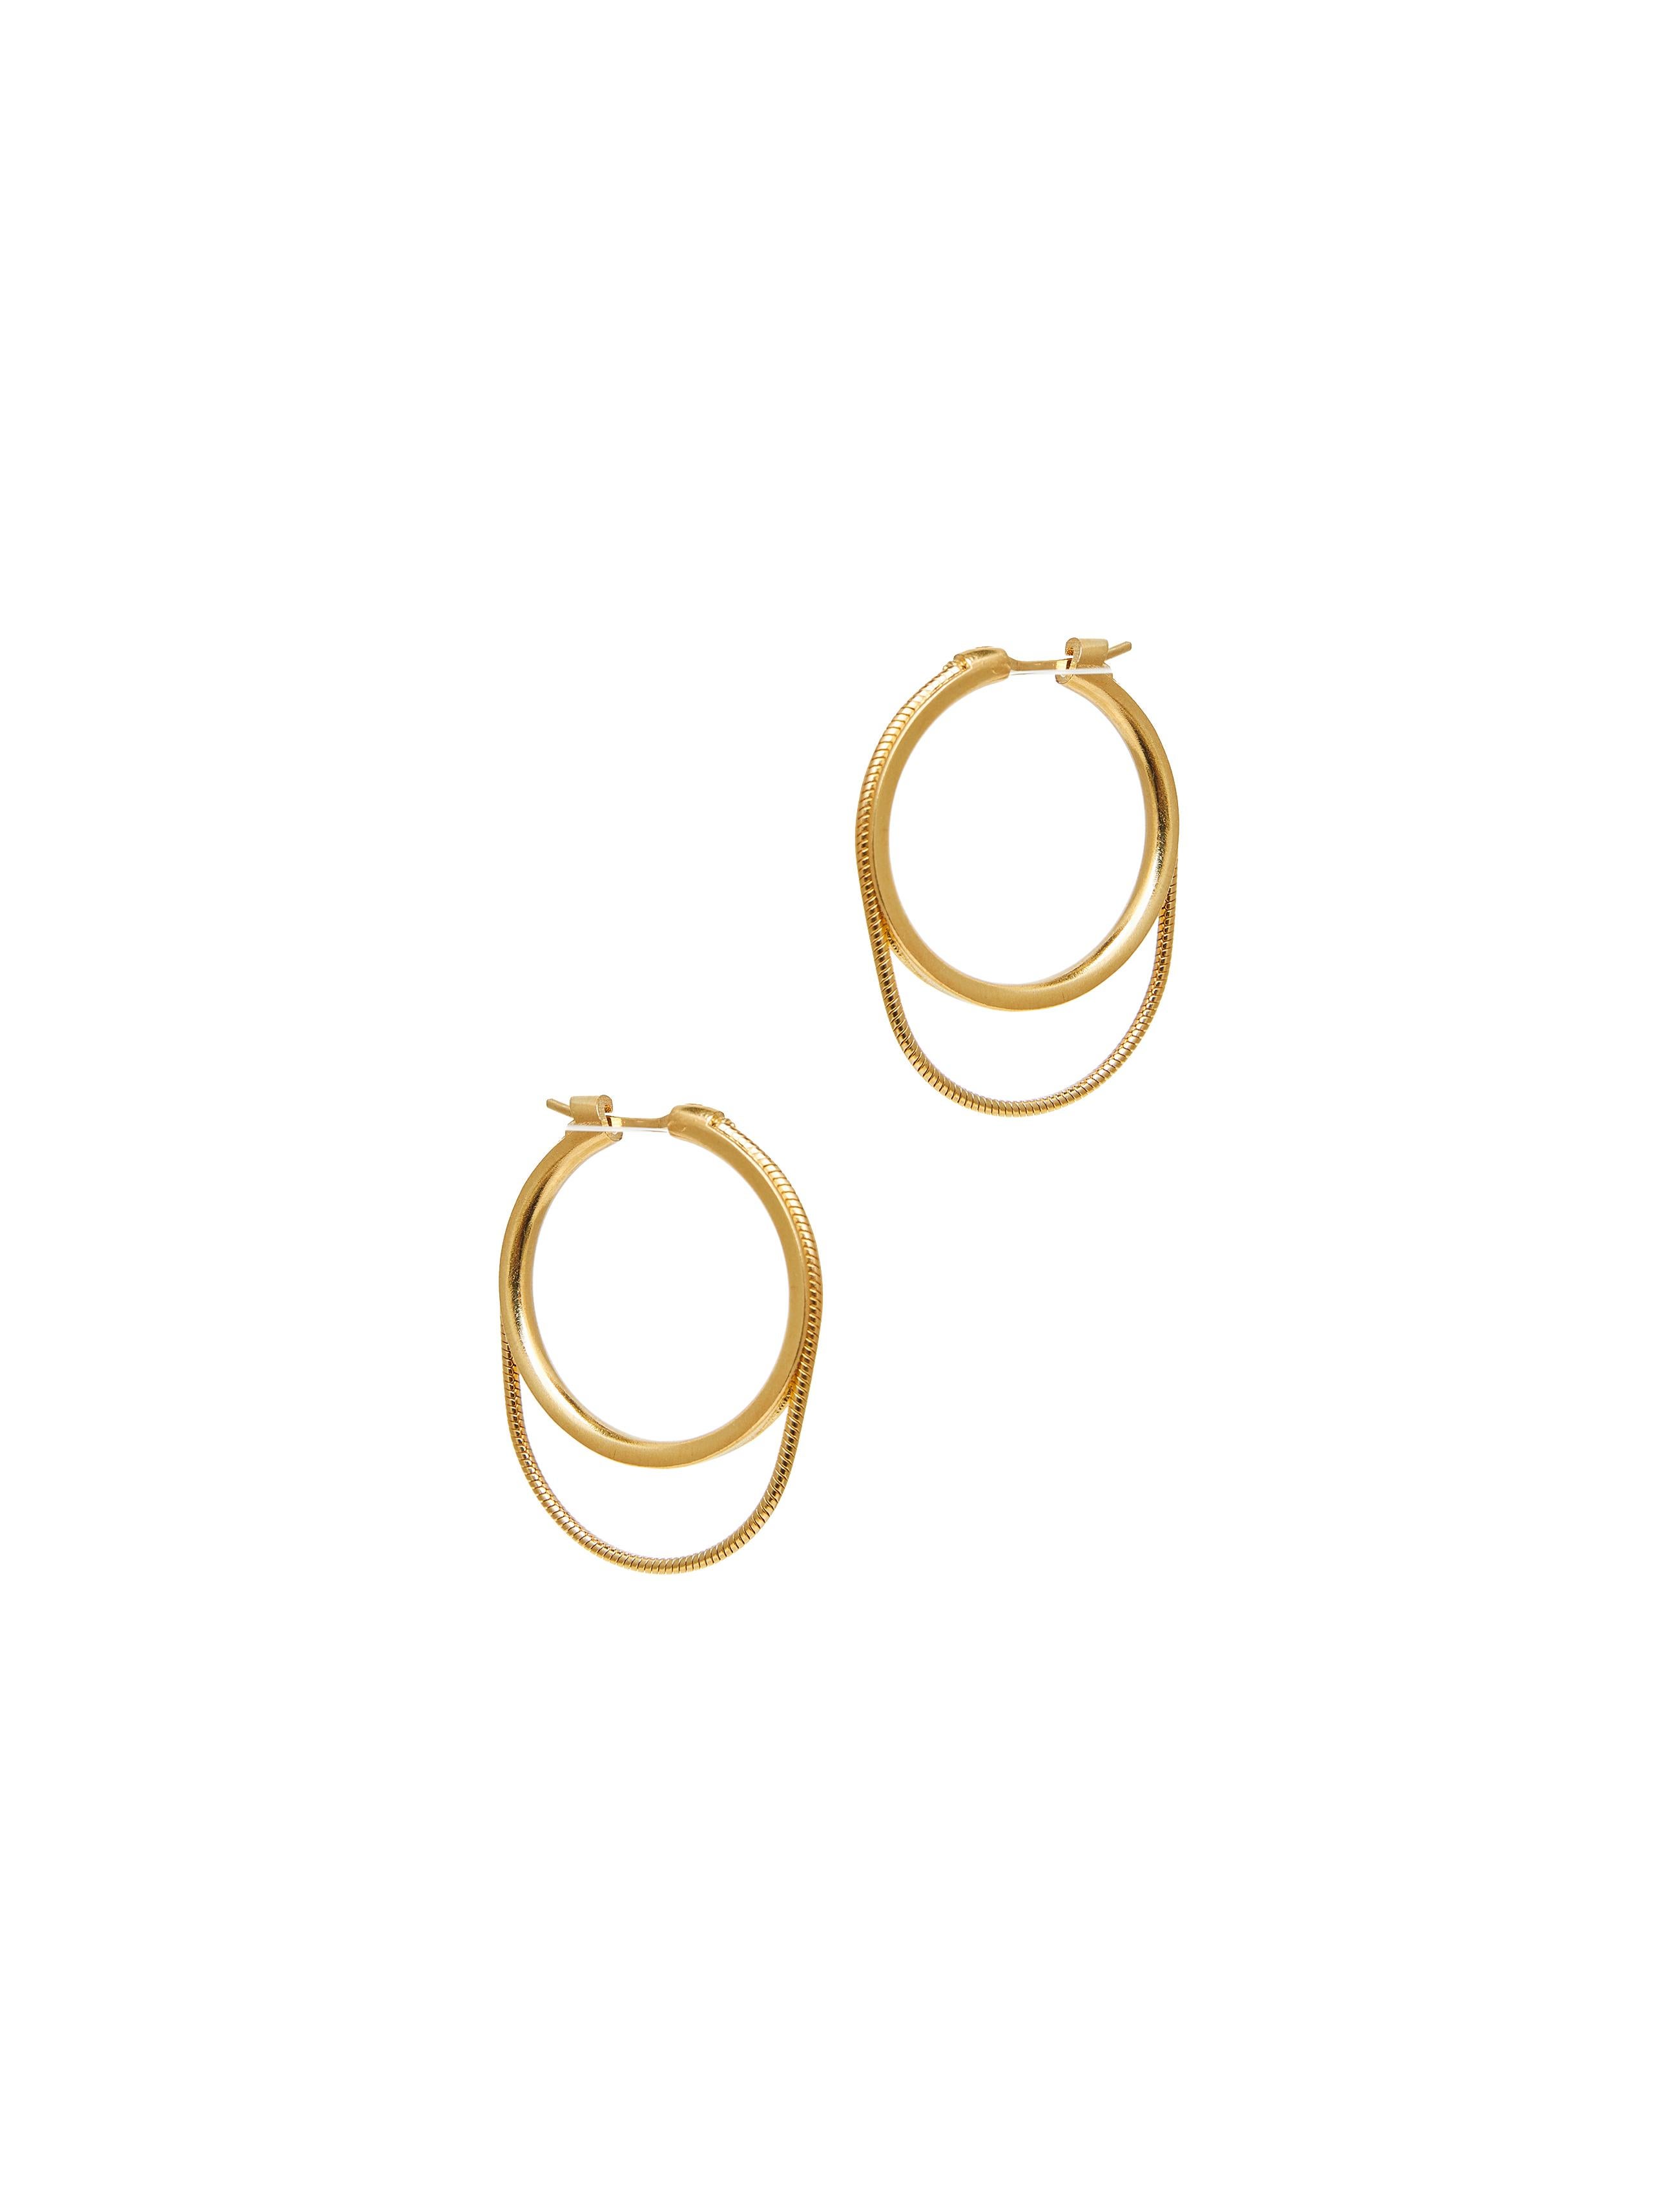 Twinkler Looped  Hoops

The twinkler looped  hoops are a combination of a classic and a touch of snake chain that adds movement to your look. 

This design is part of the Glow collection which is inspired by the Earth and it's Elements -water, air